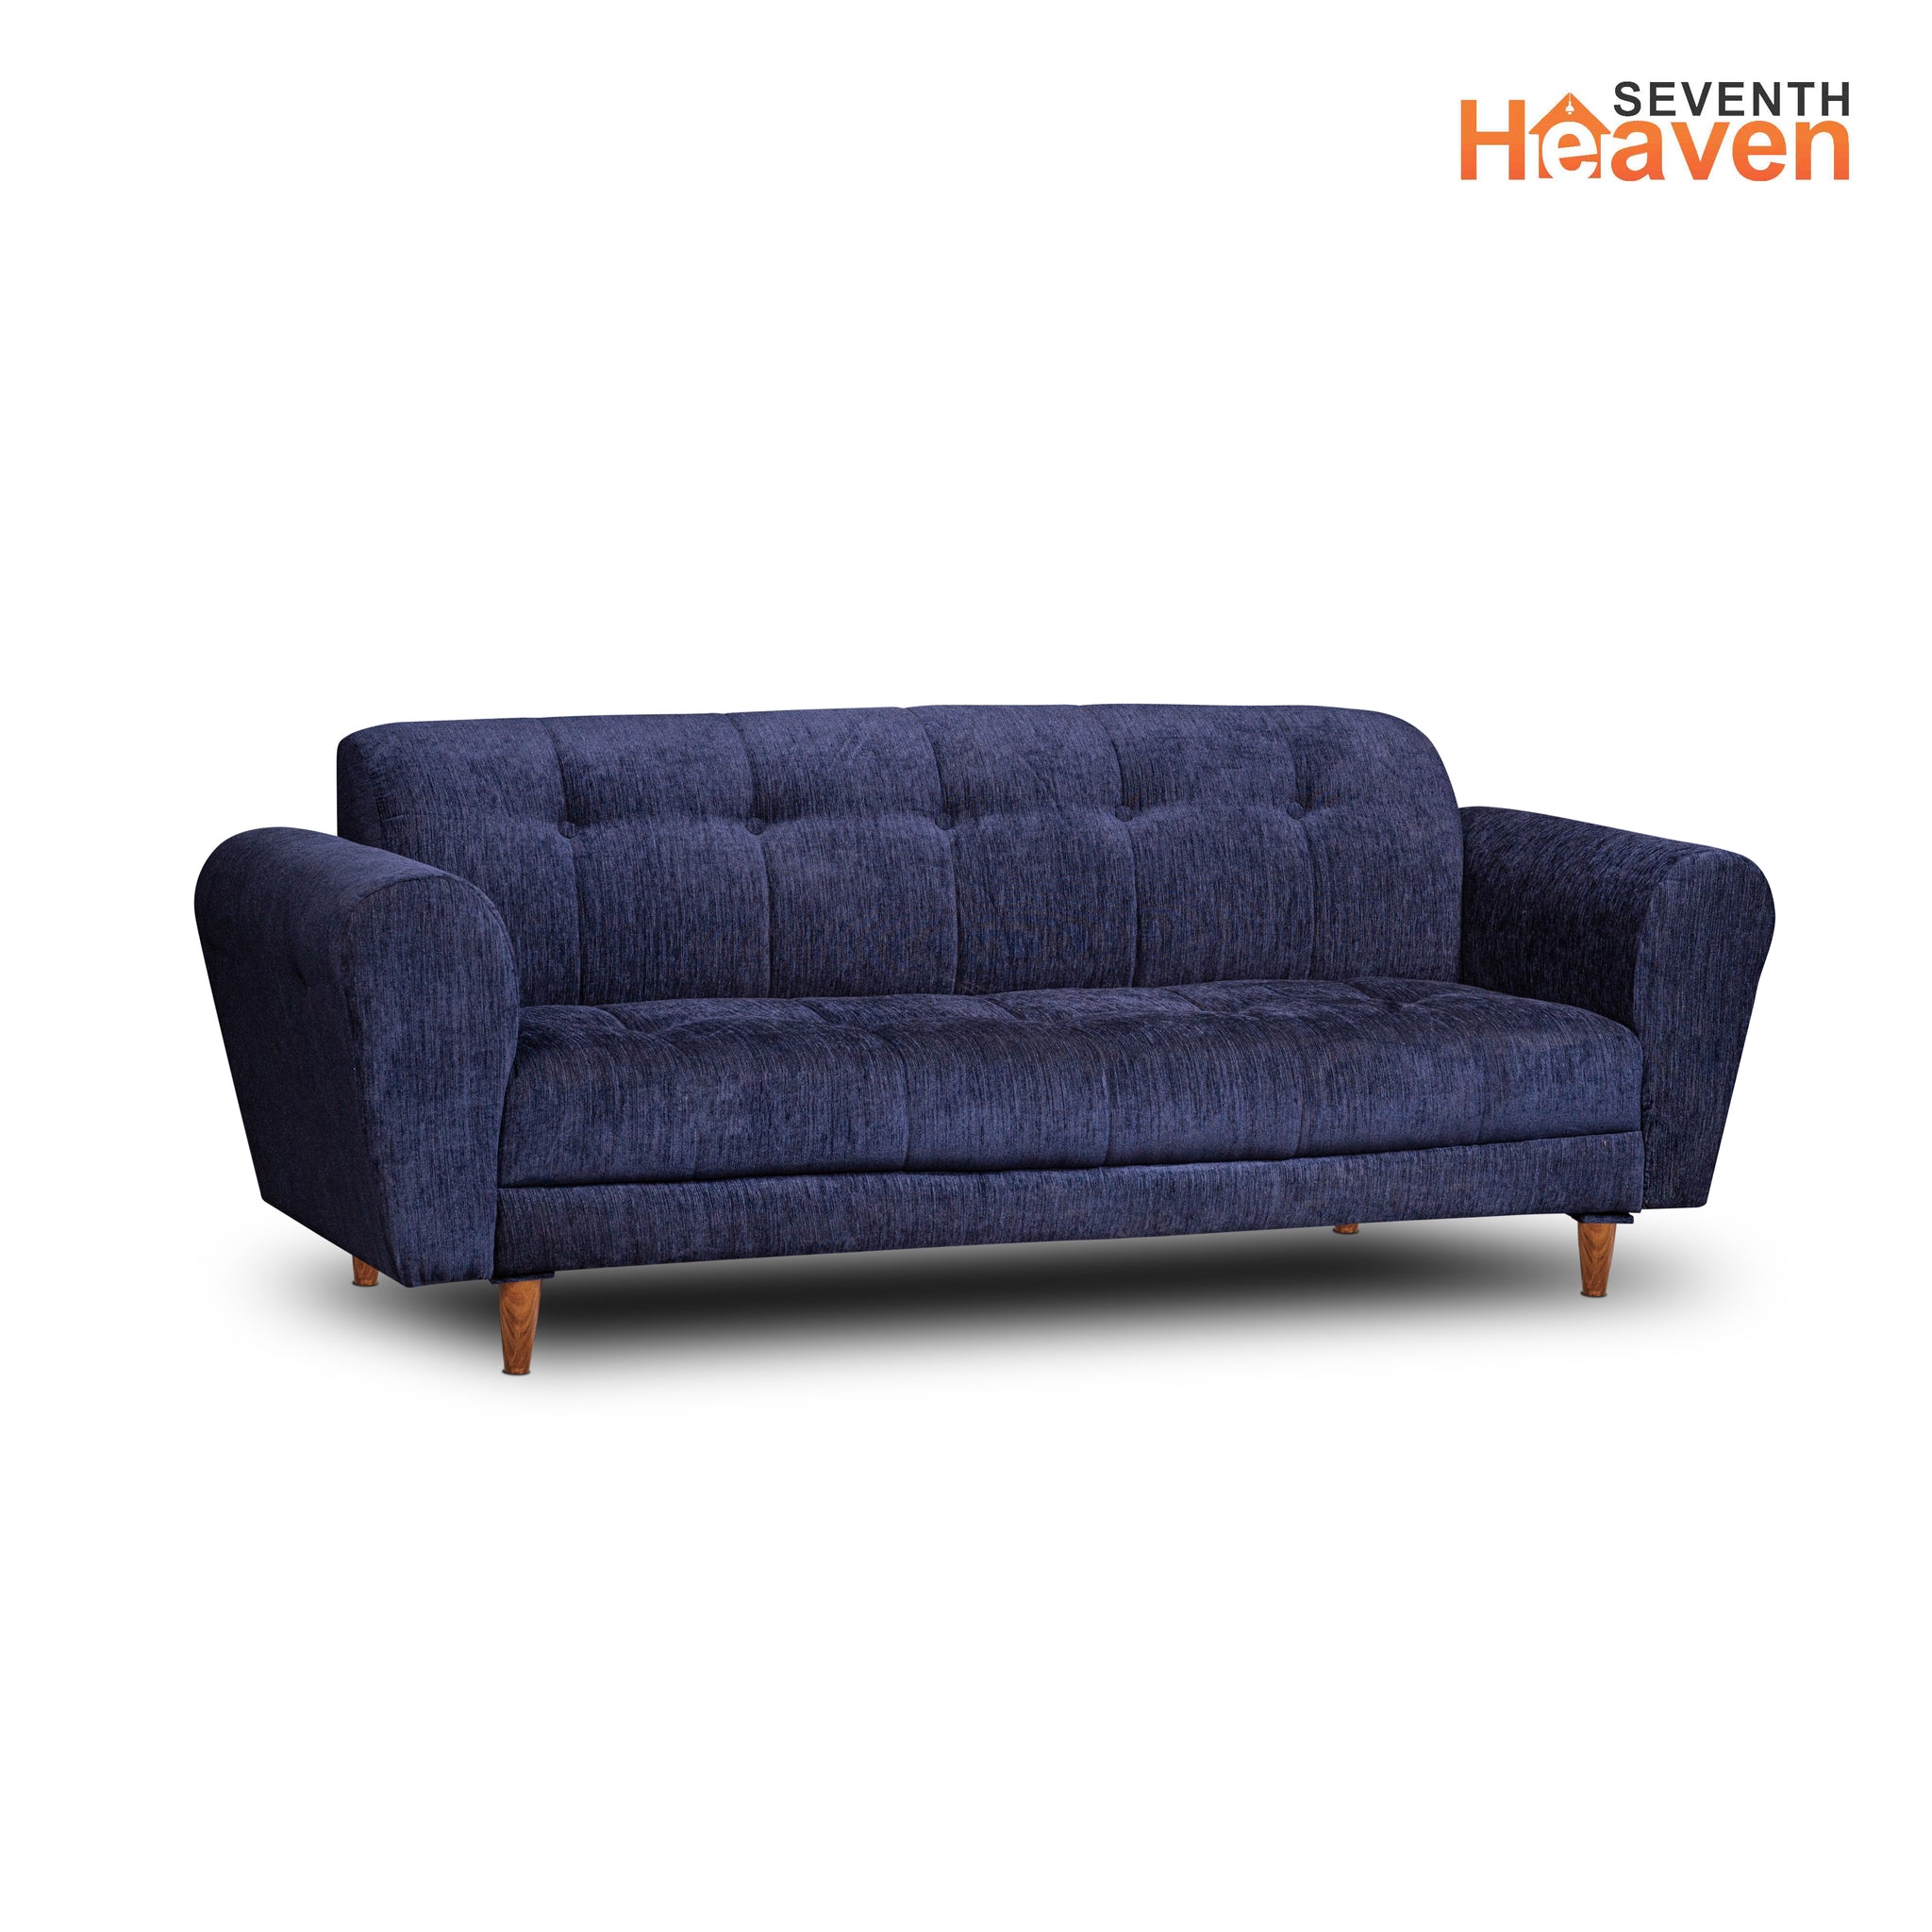 Seventh Heaven Milan 3 Seater Wooden Sofa Set Modern & Elegant Smart Furniture Range for luxurious homes, living rooms and offices. Blue Colour Molphino fabric with sheesham polished wooden legs.